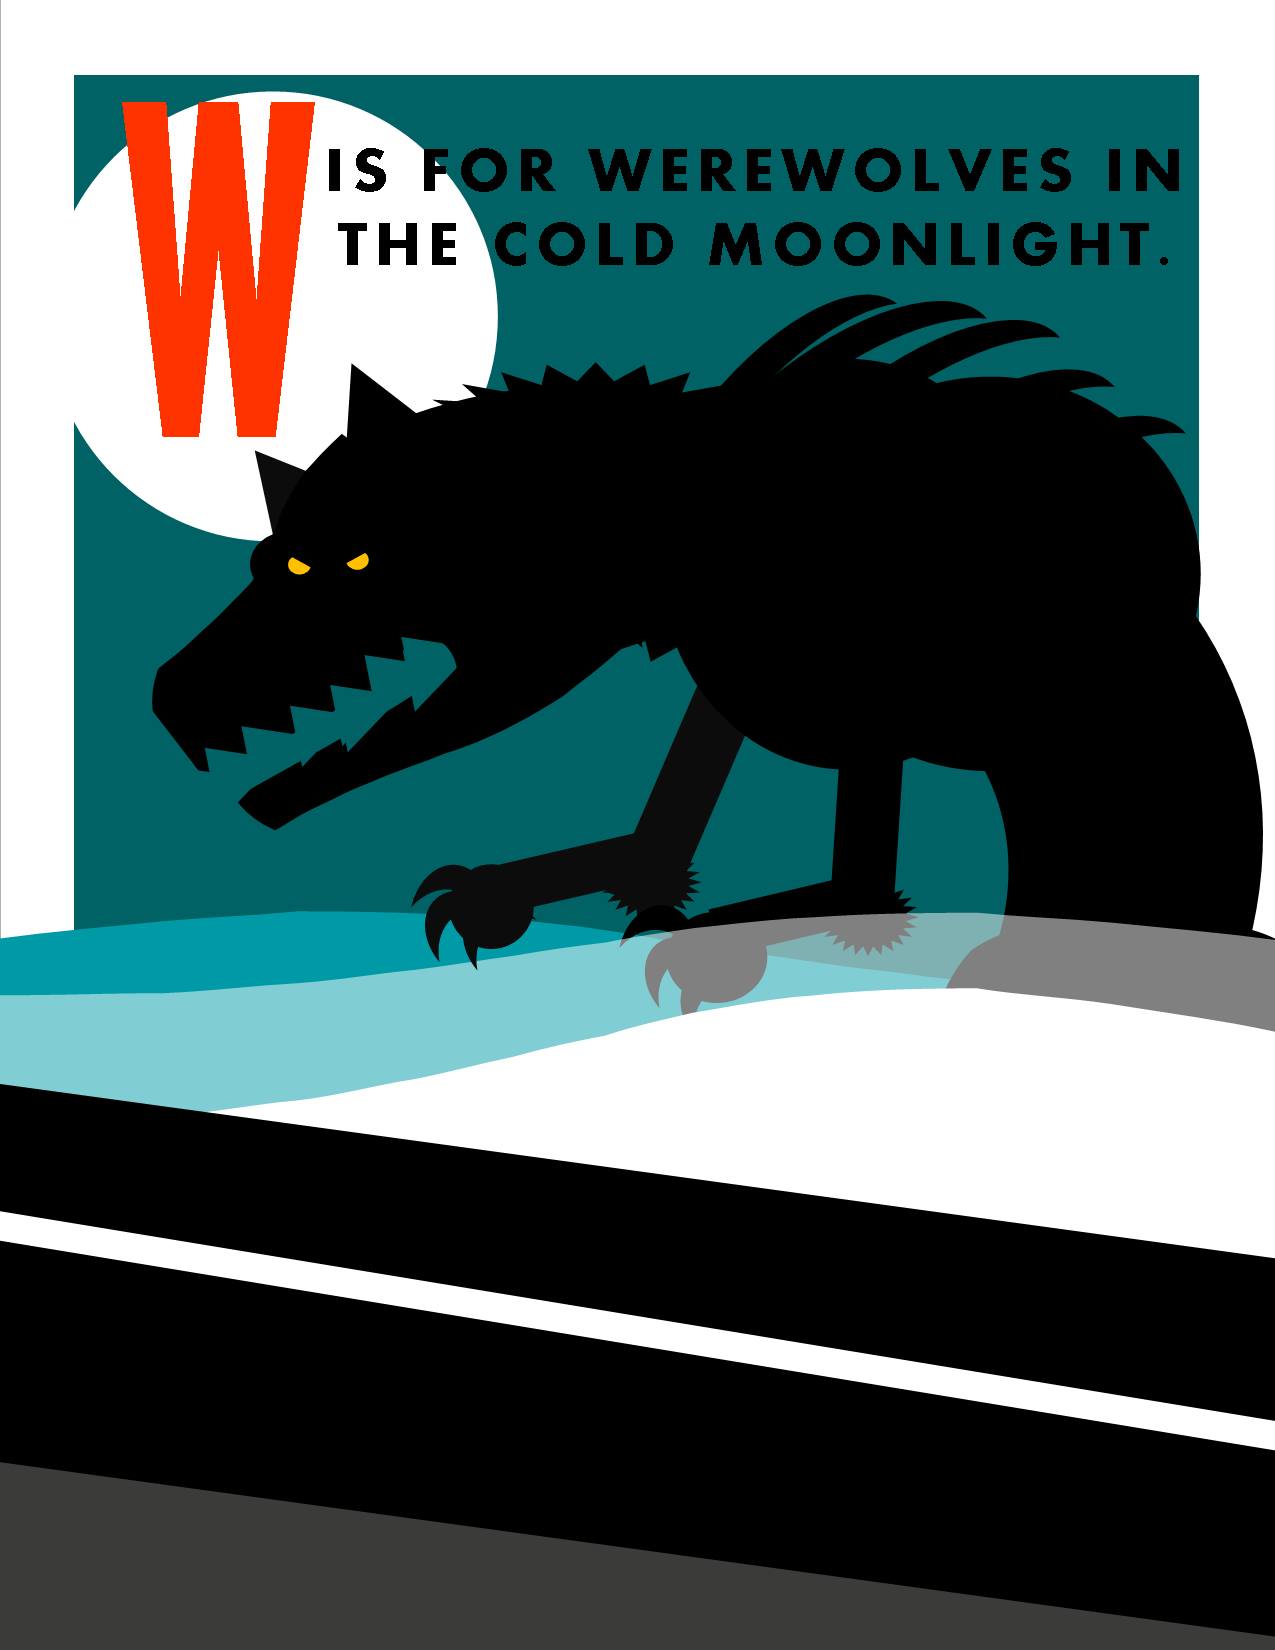 W is for Werewolves in the Cold Moonlight